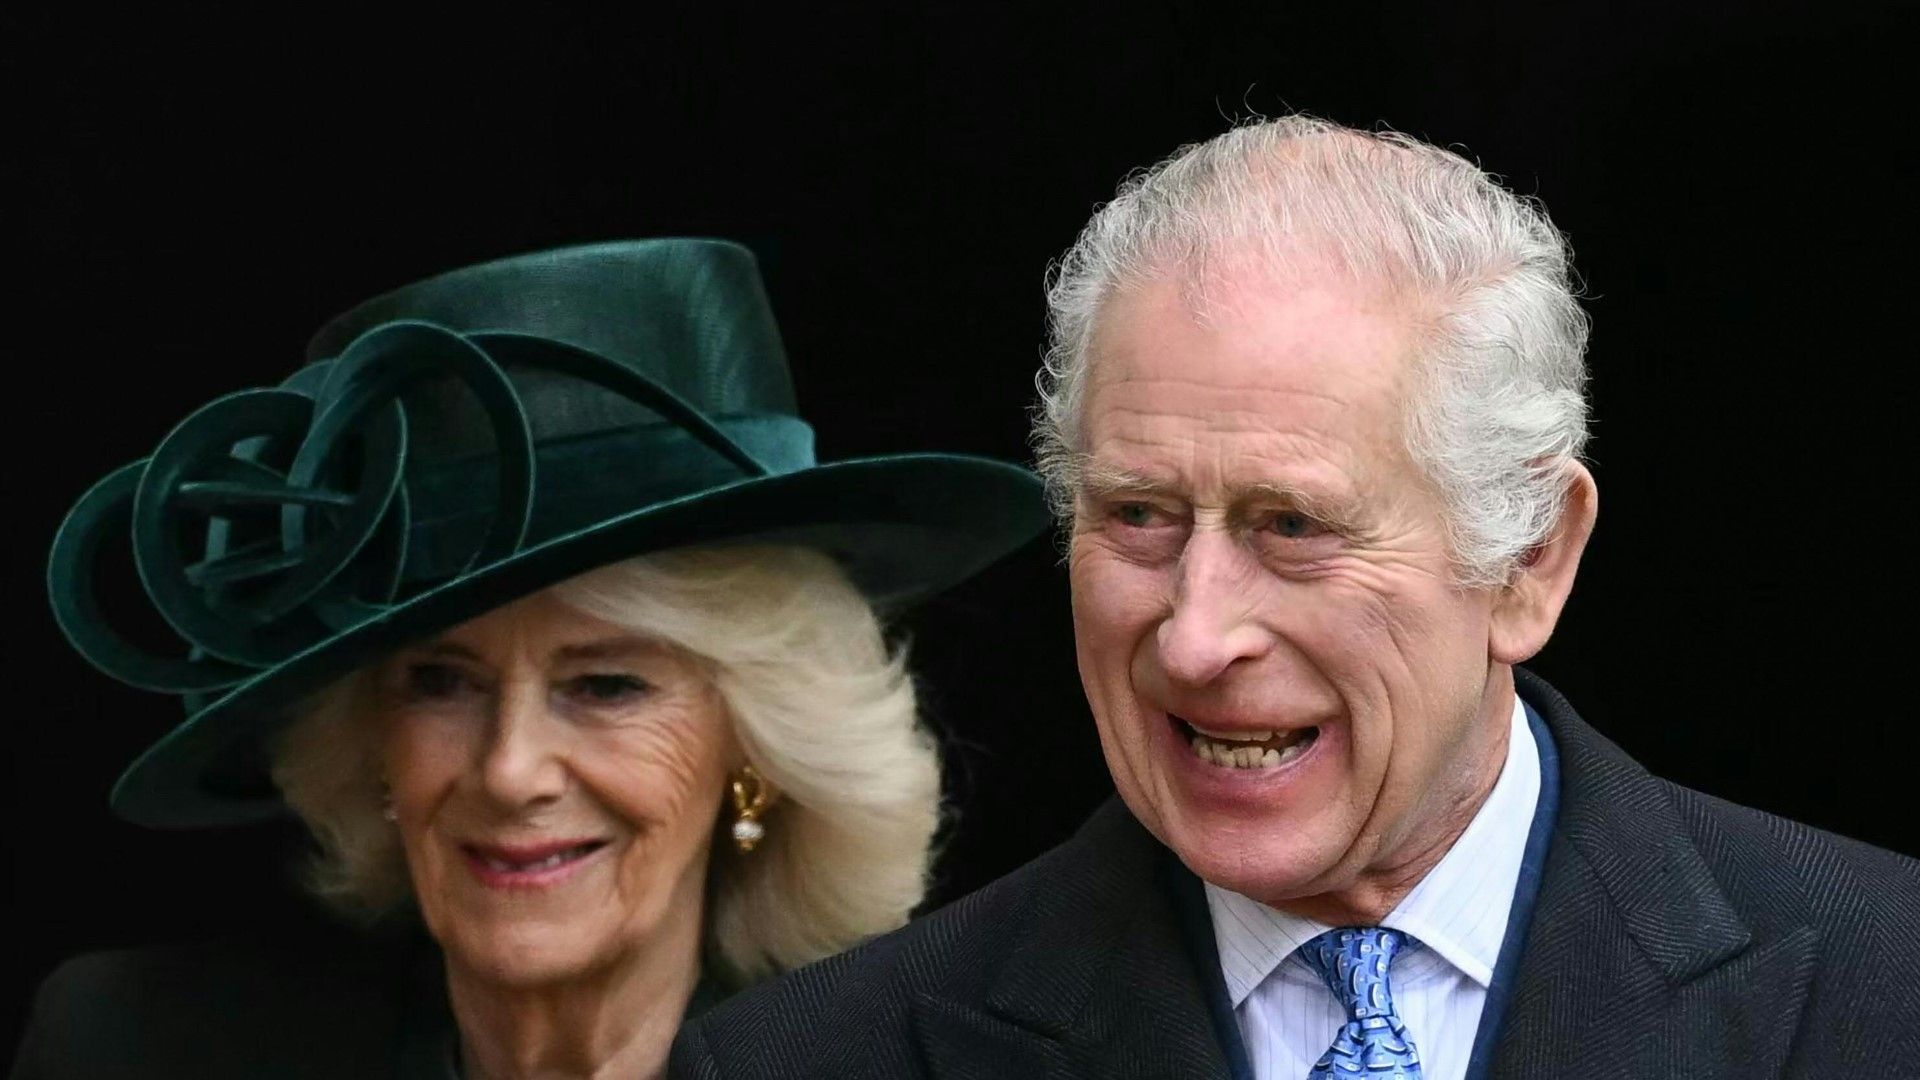 Charles III returns to public life on Tuesday